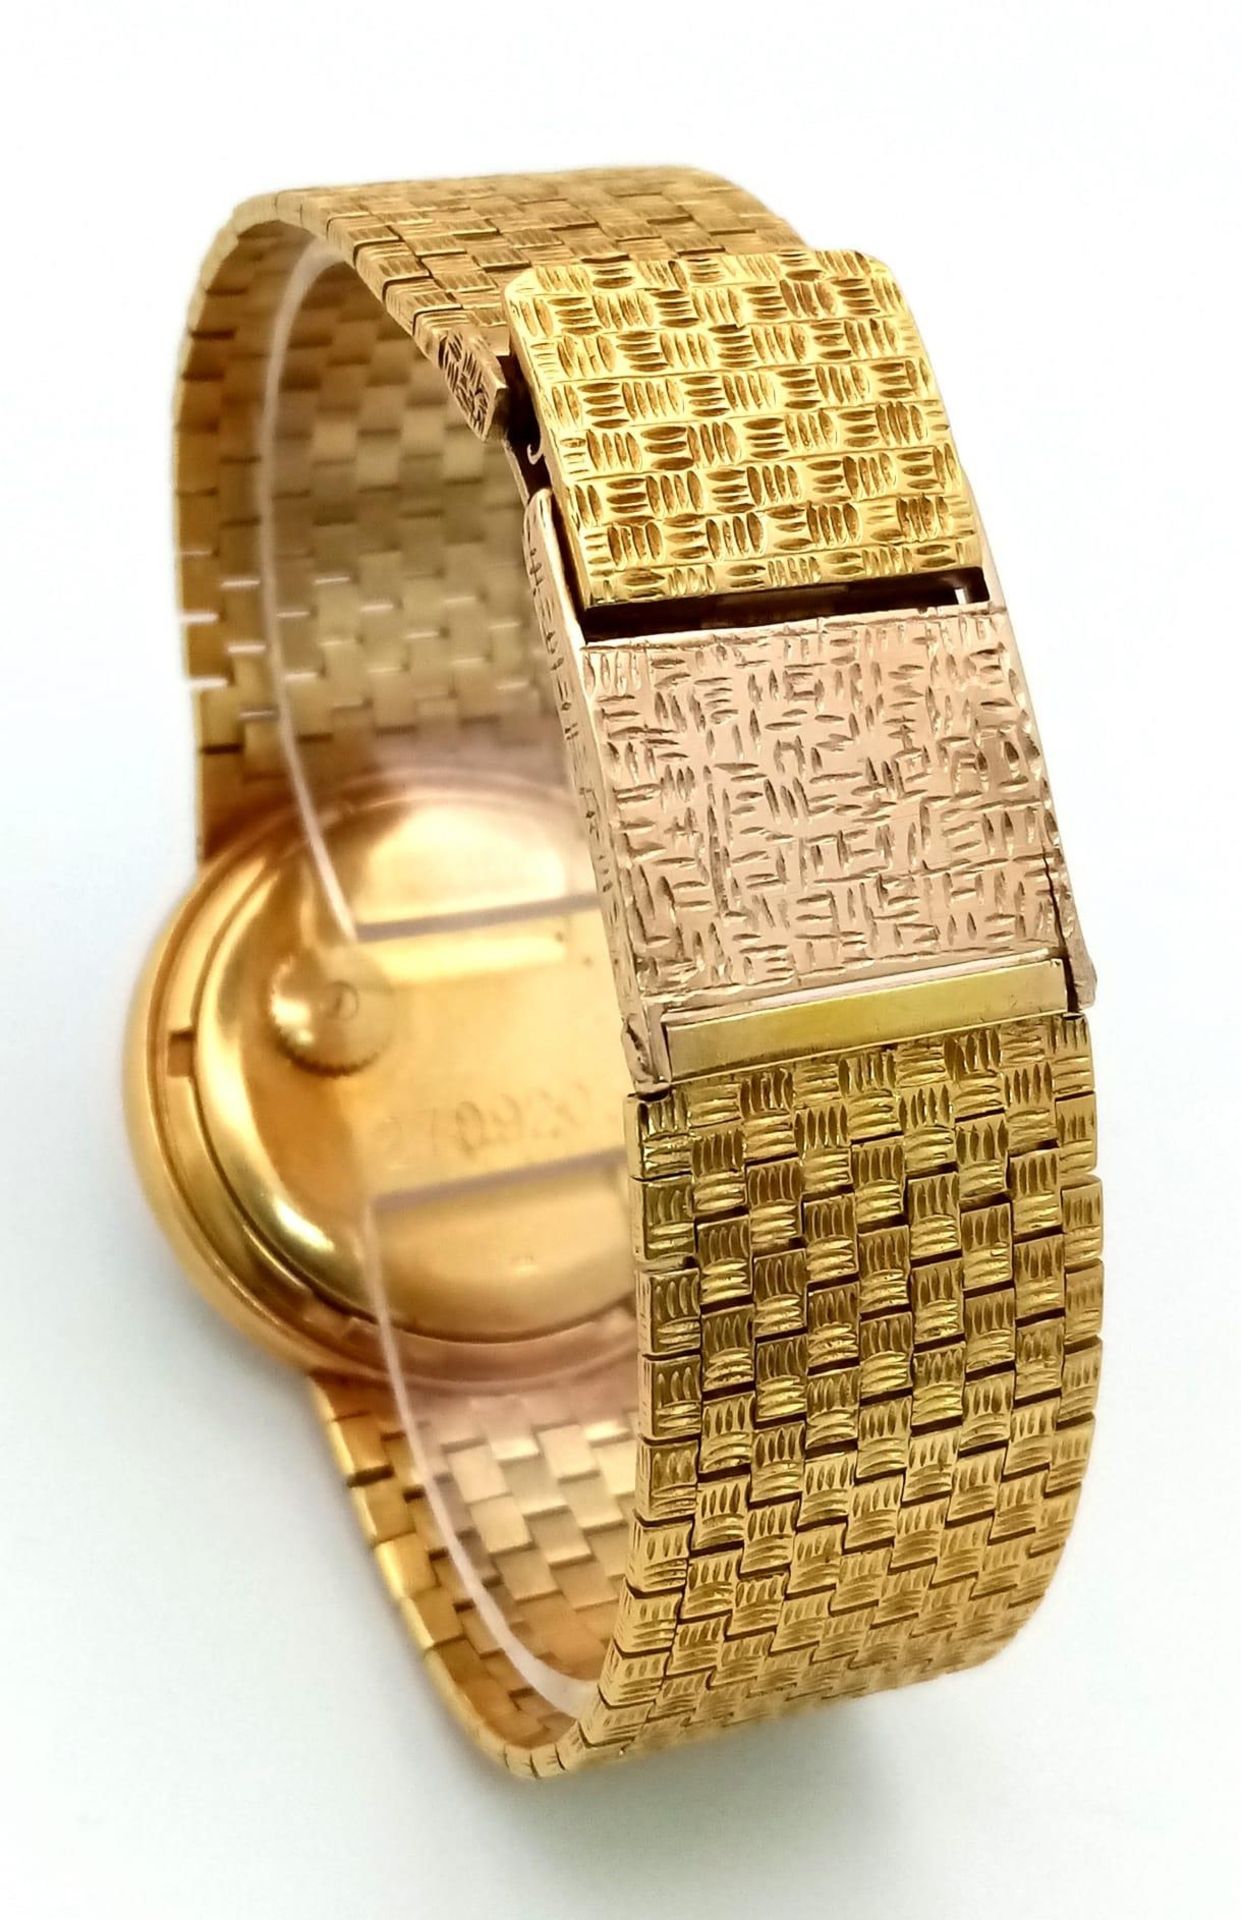 A SHOW STOPPING 18K GOLD PATEK PHILIPPE GENTS WATCH WITH BLOCK LINK SOLID 18K GOLD STRAP, AMAZING - Image 4 of 8